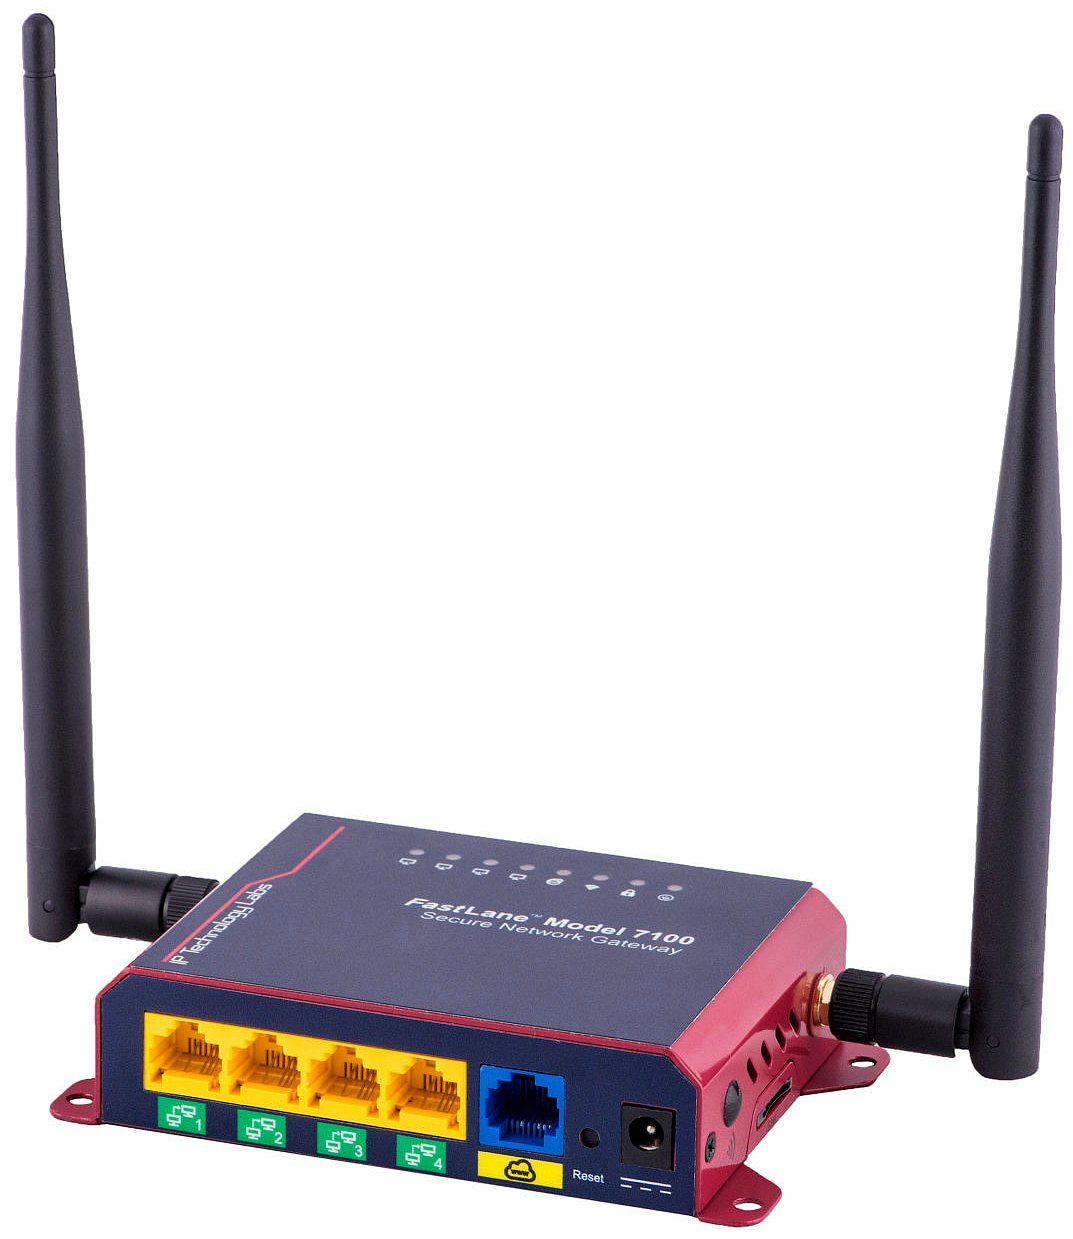 How to Reset a Router Remotely